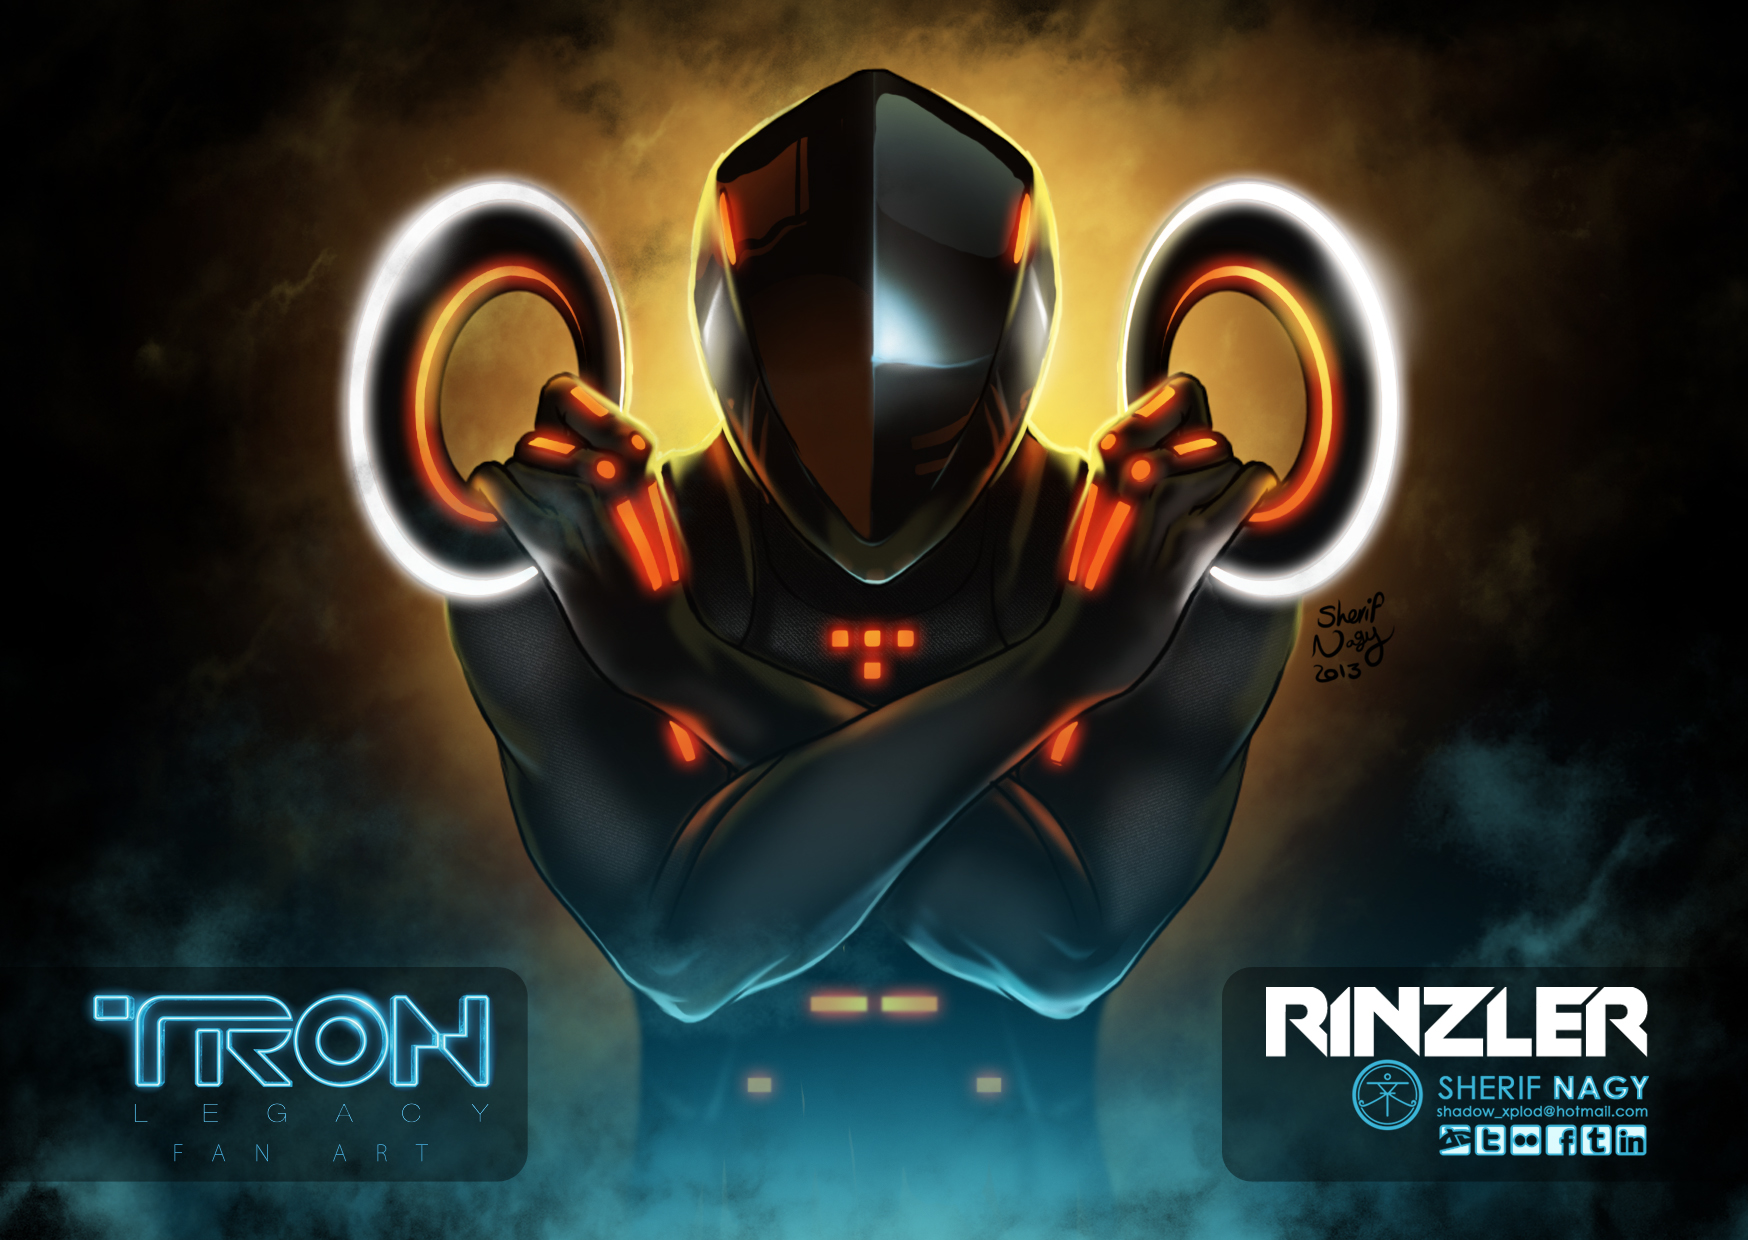 TRON Legacy Wallpaper and Background Image 1748x1240 1748x1240